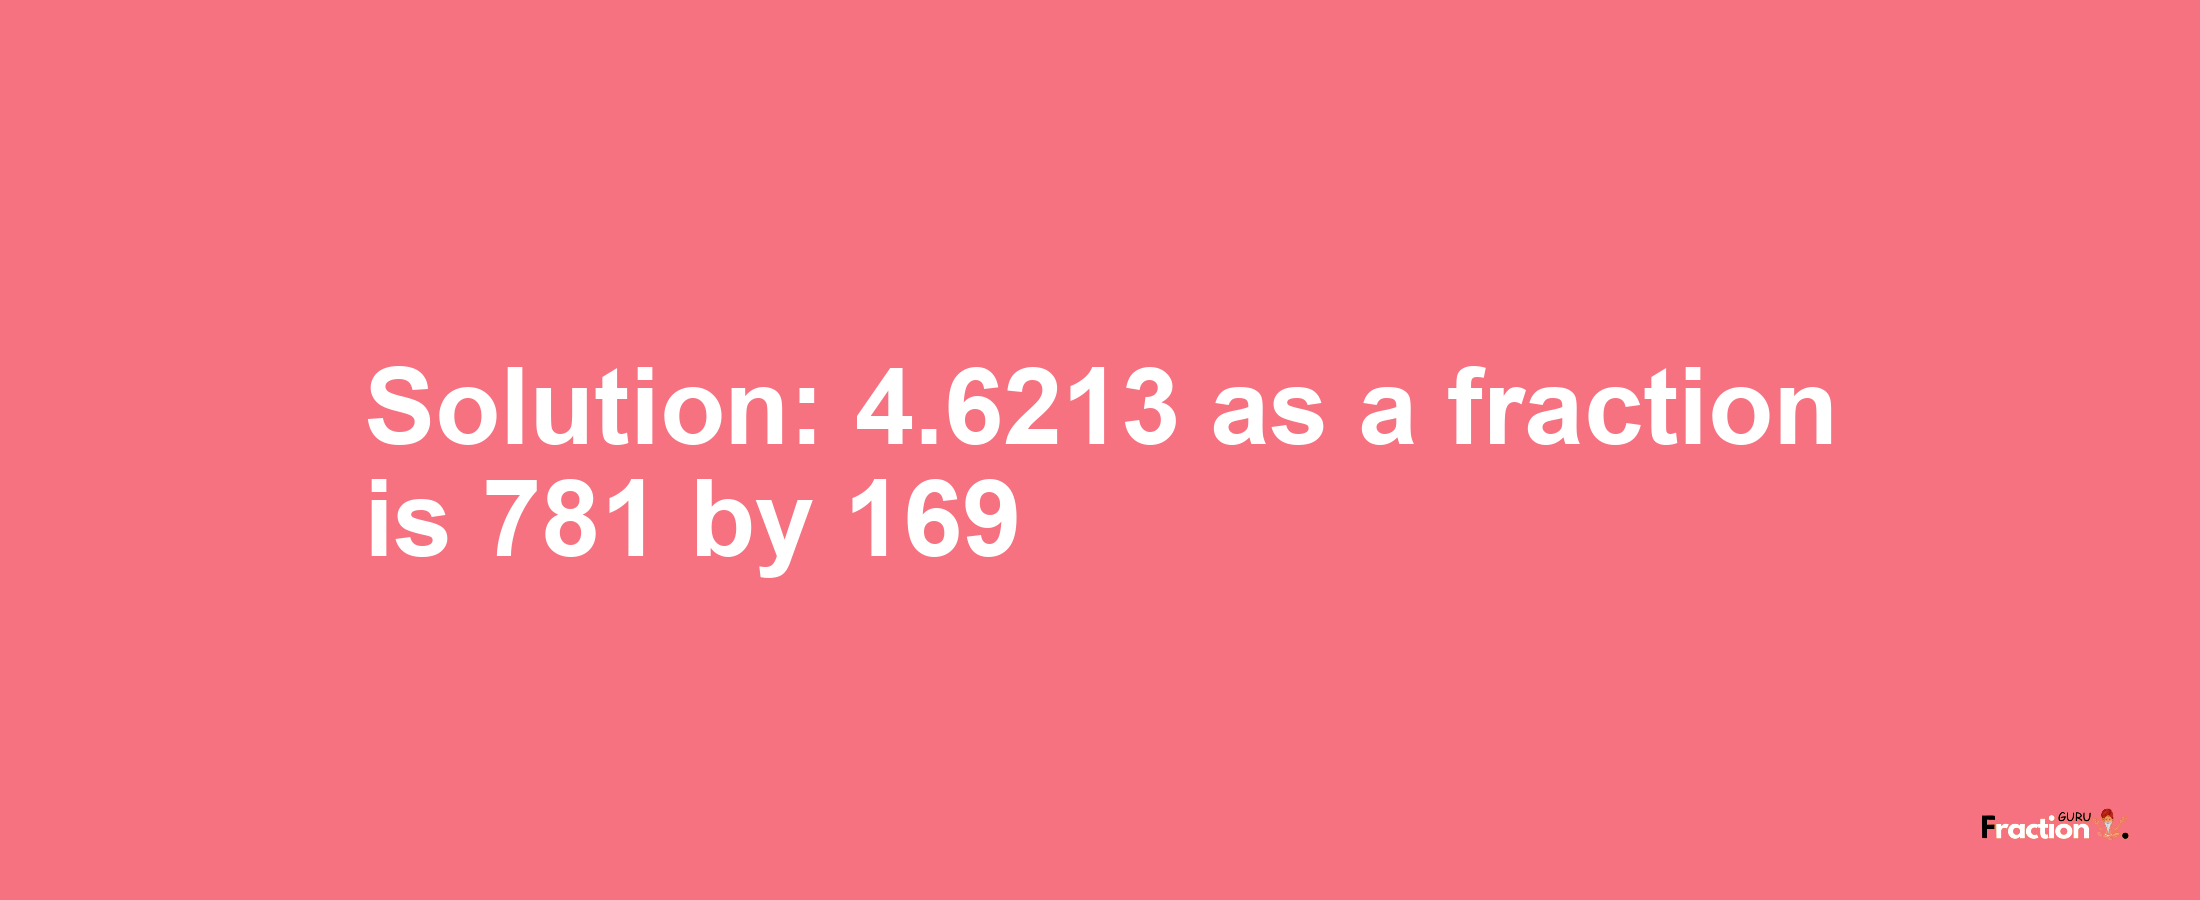 Solution:4.6213 as a fraction is 781/169